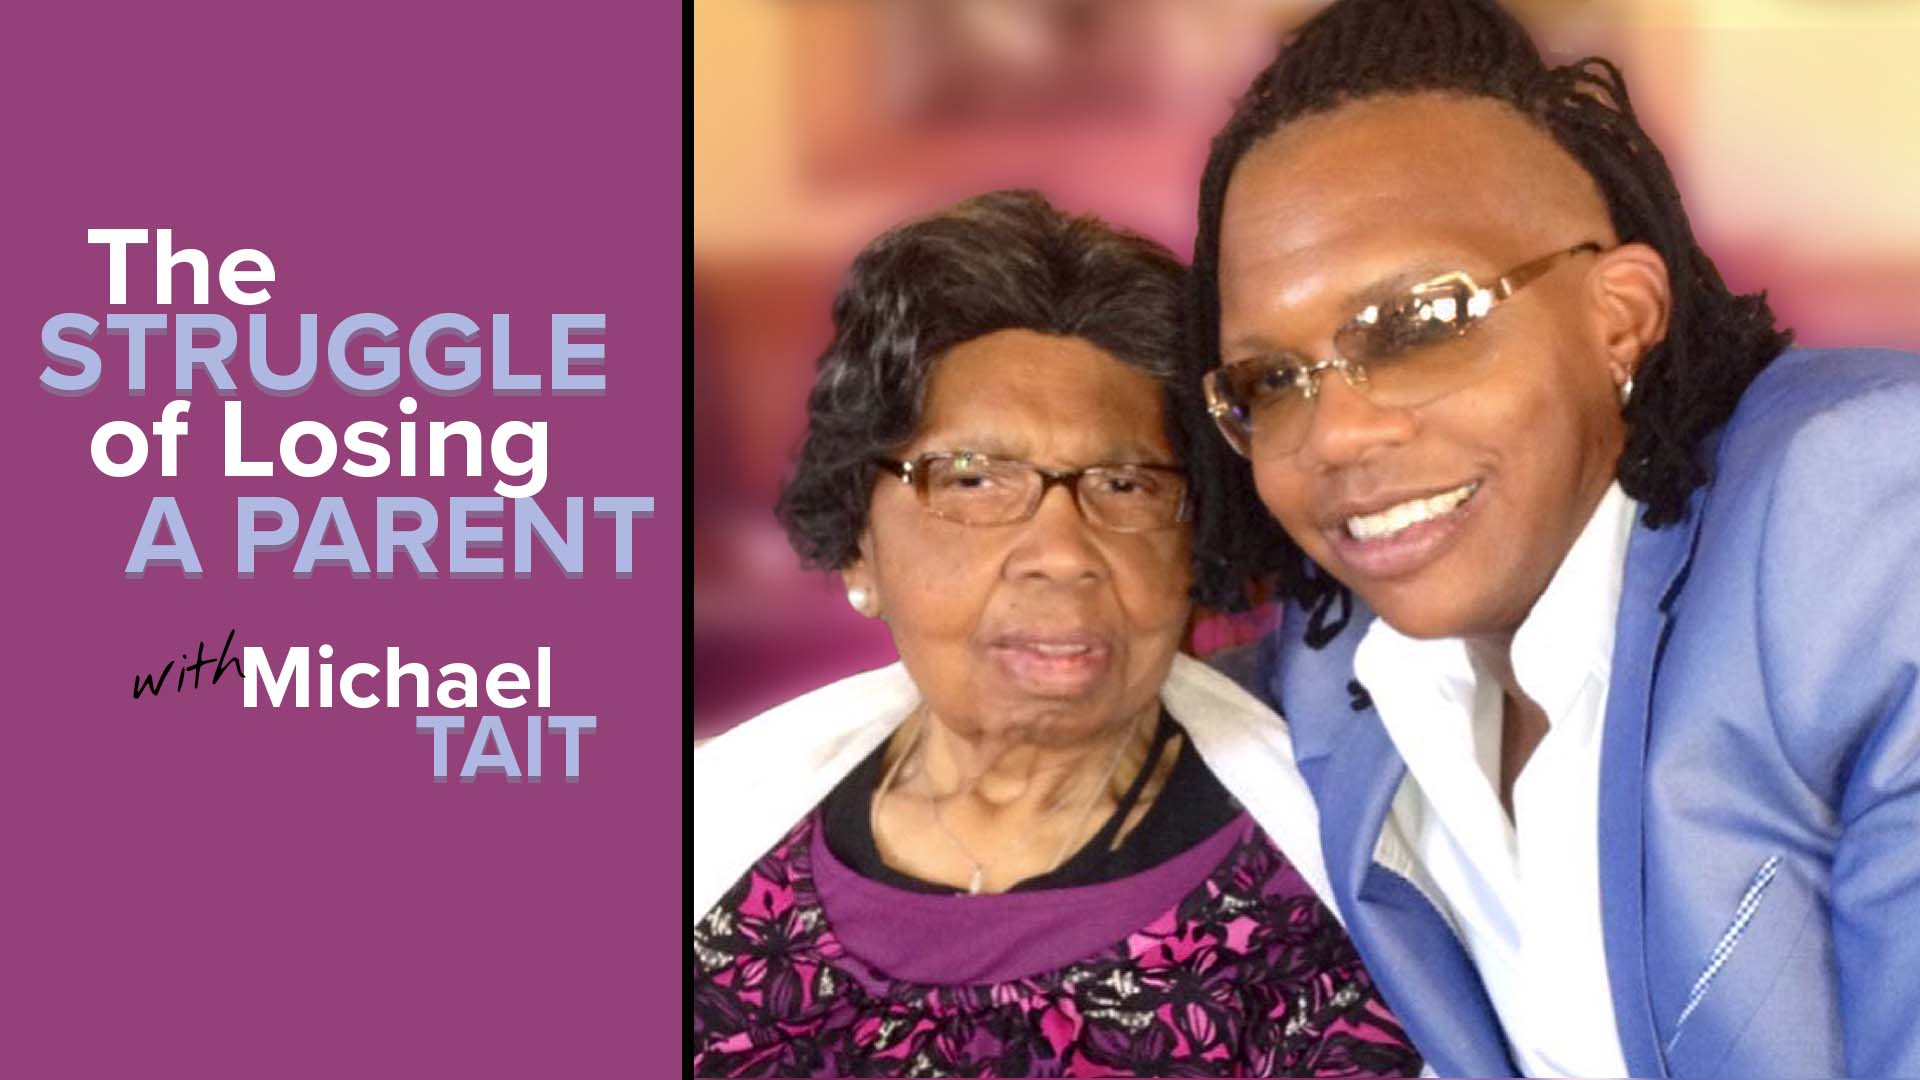 Michael Tait from the Newsboys talks about the struggle of losing a parent